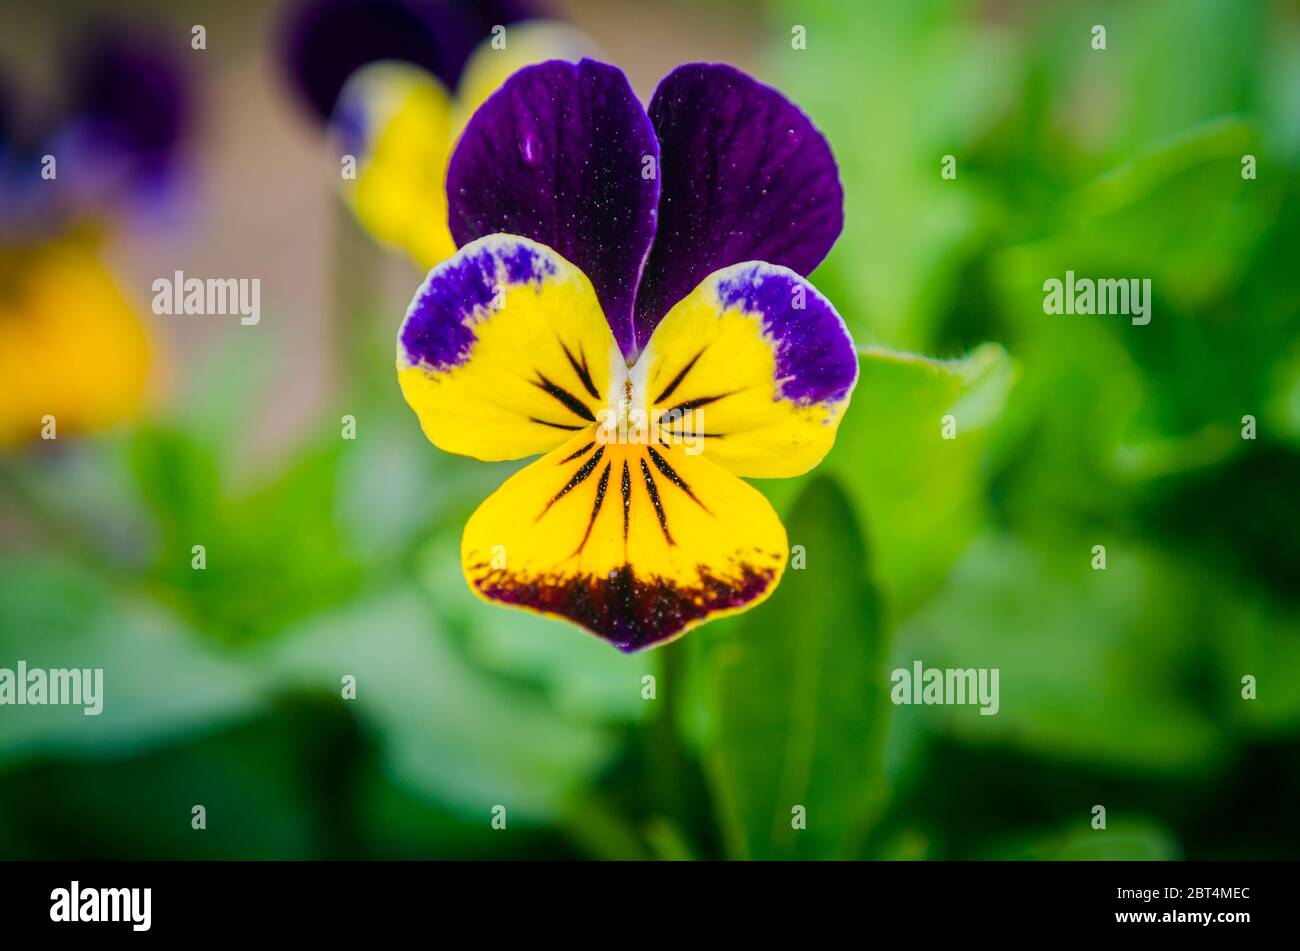 Violet pansy flower, close-up of viola tricolor in the spring garden, closeup, background Stock Photo